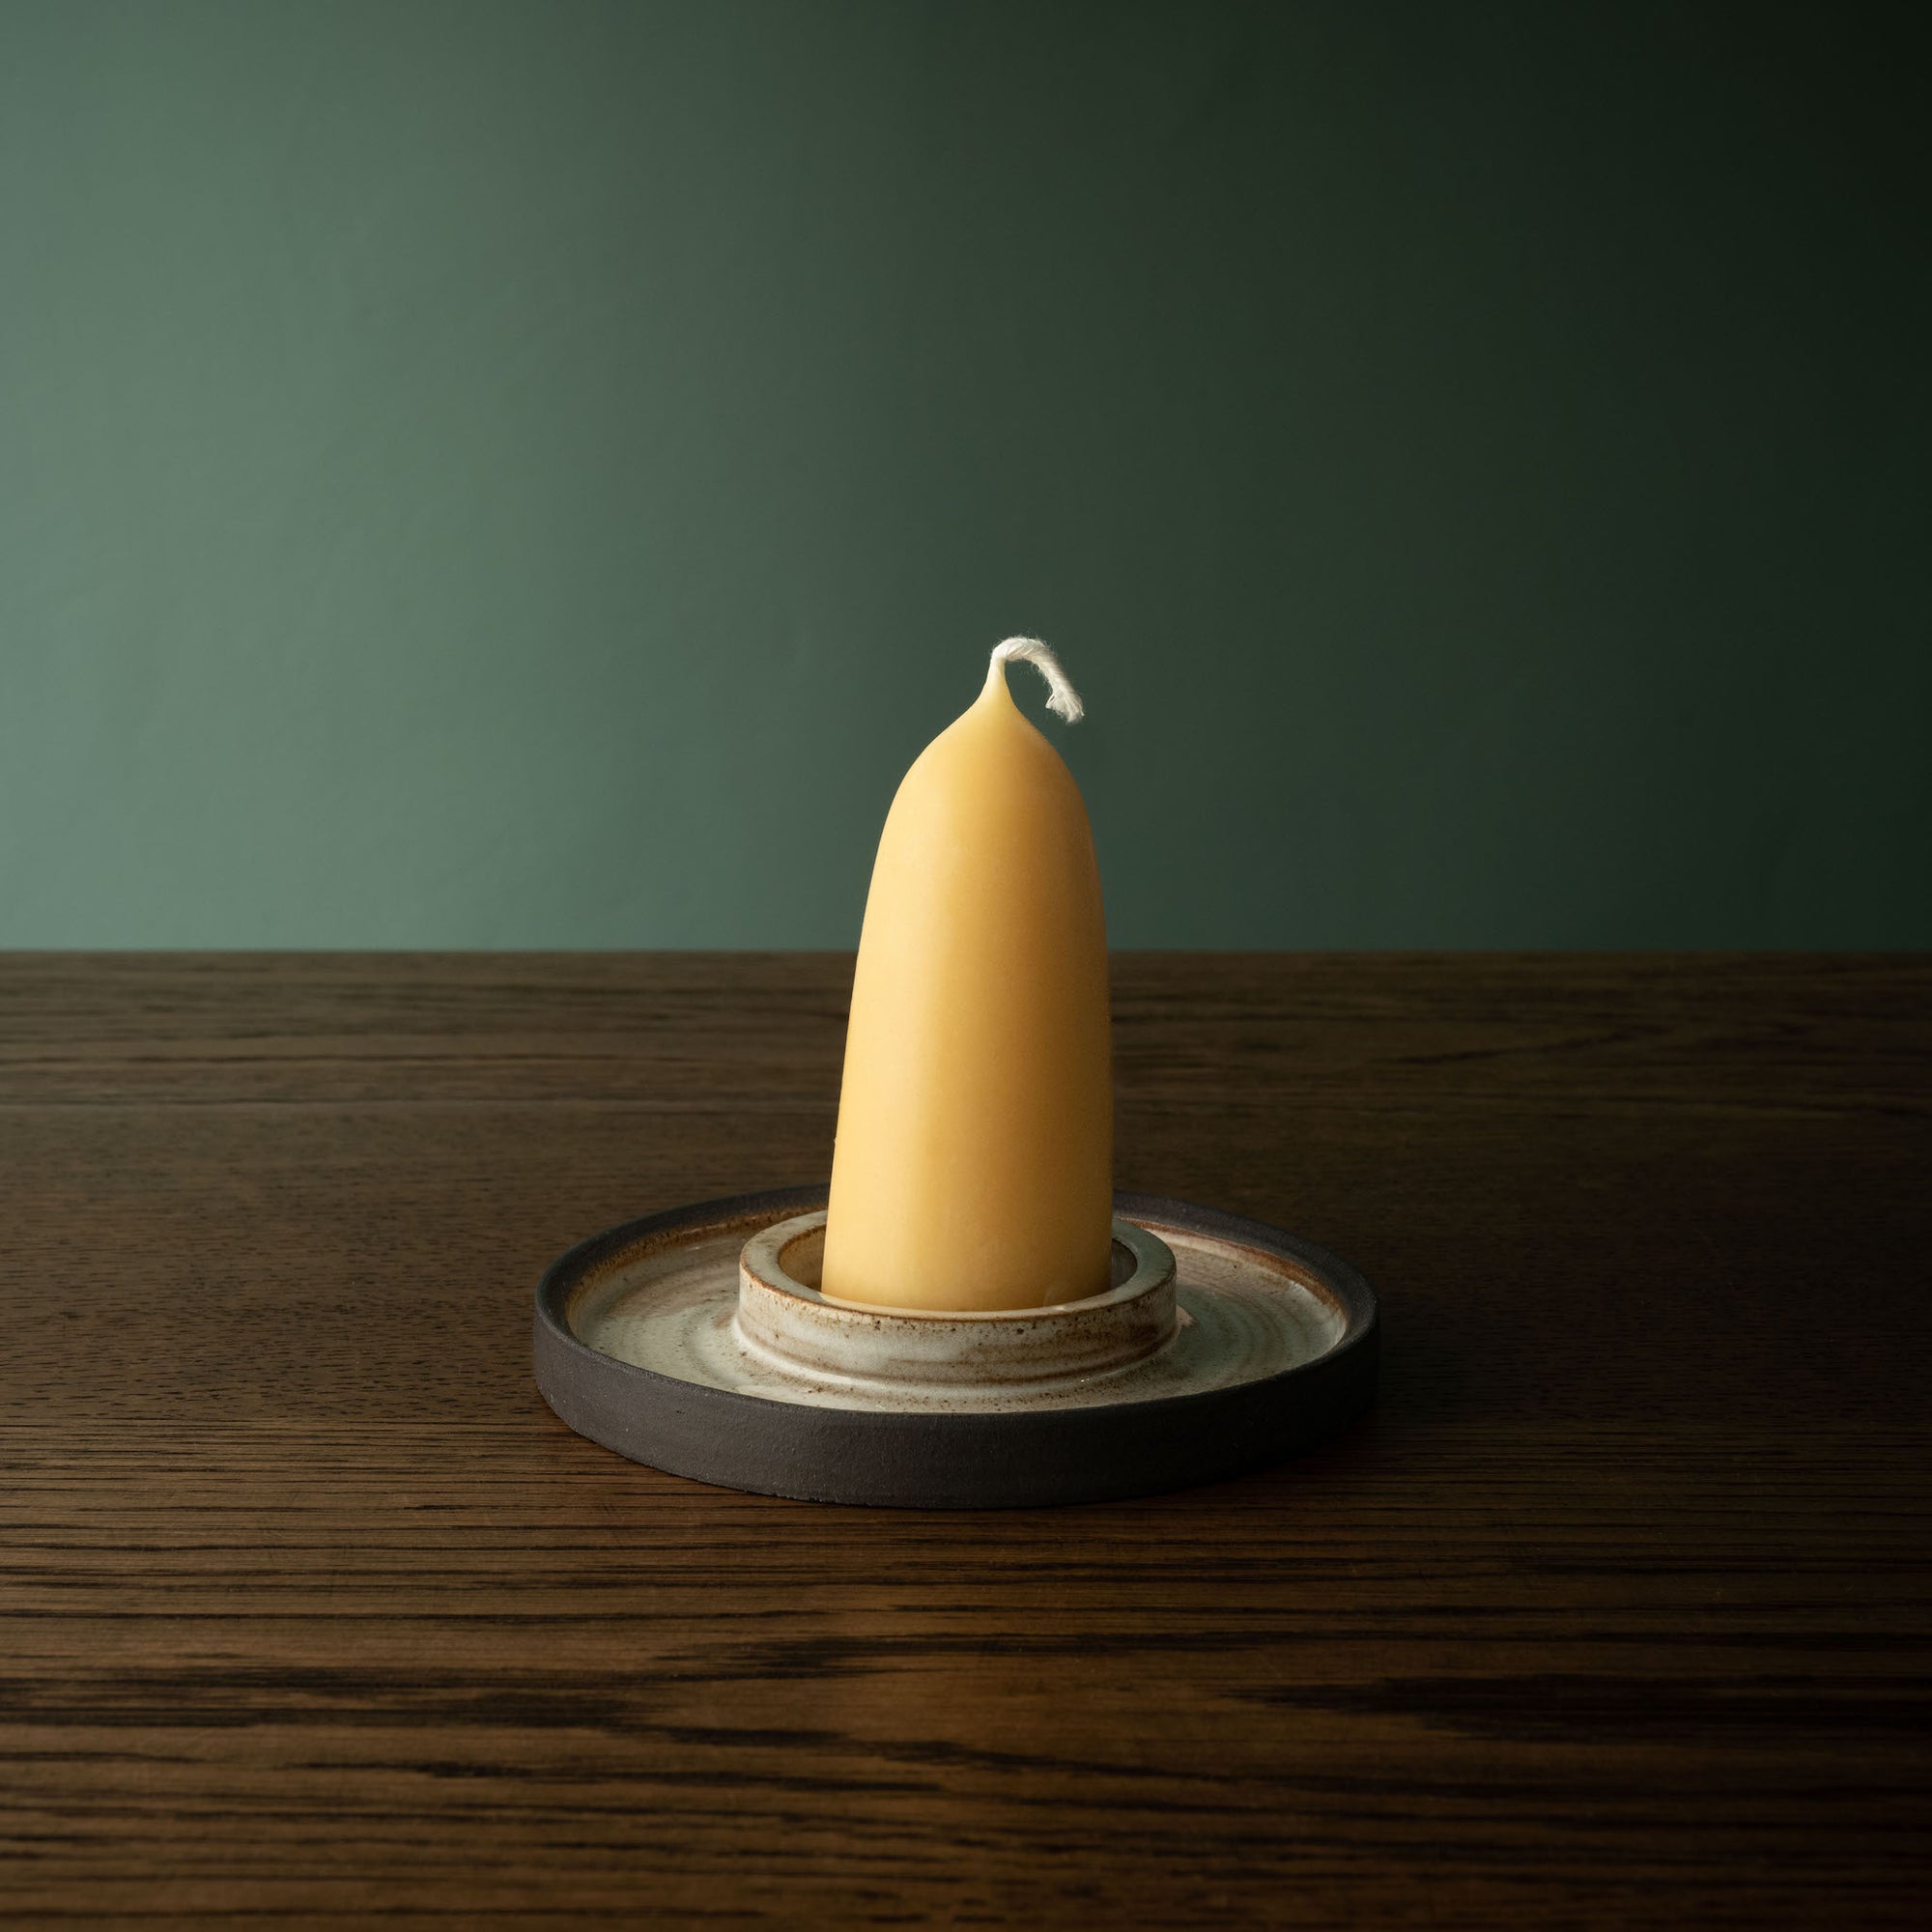 Beeswax Stumpie Candle & Carrick Ceramics Wide Candle Holder